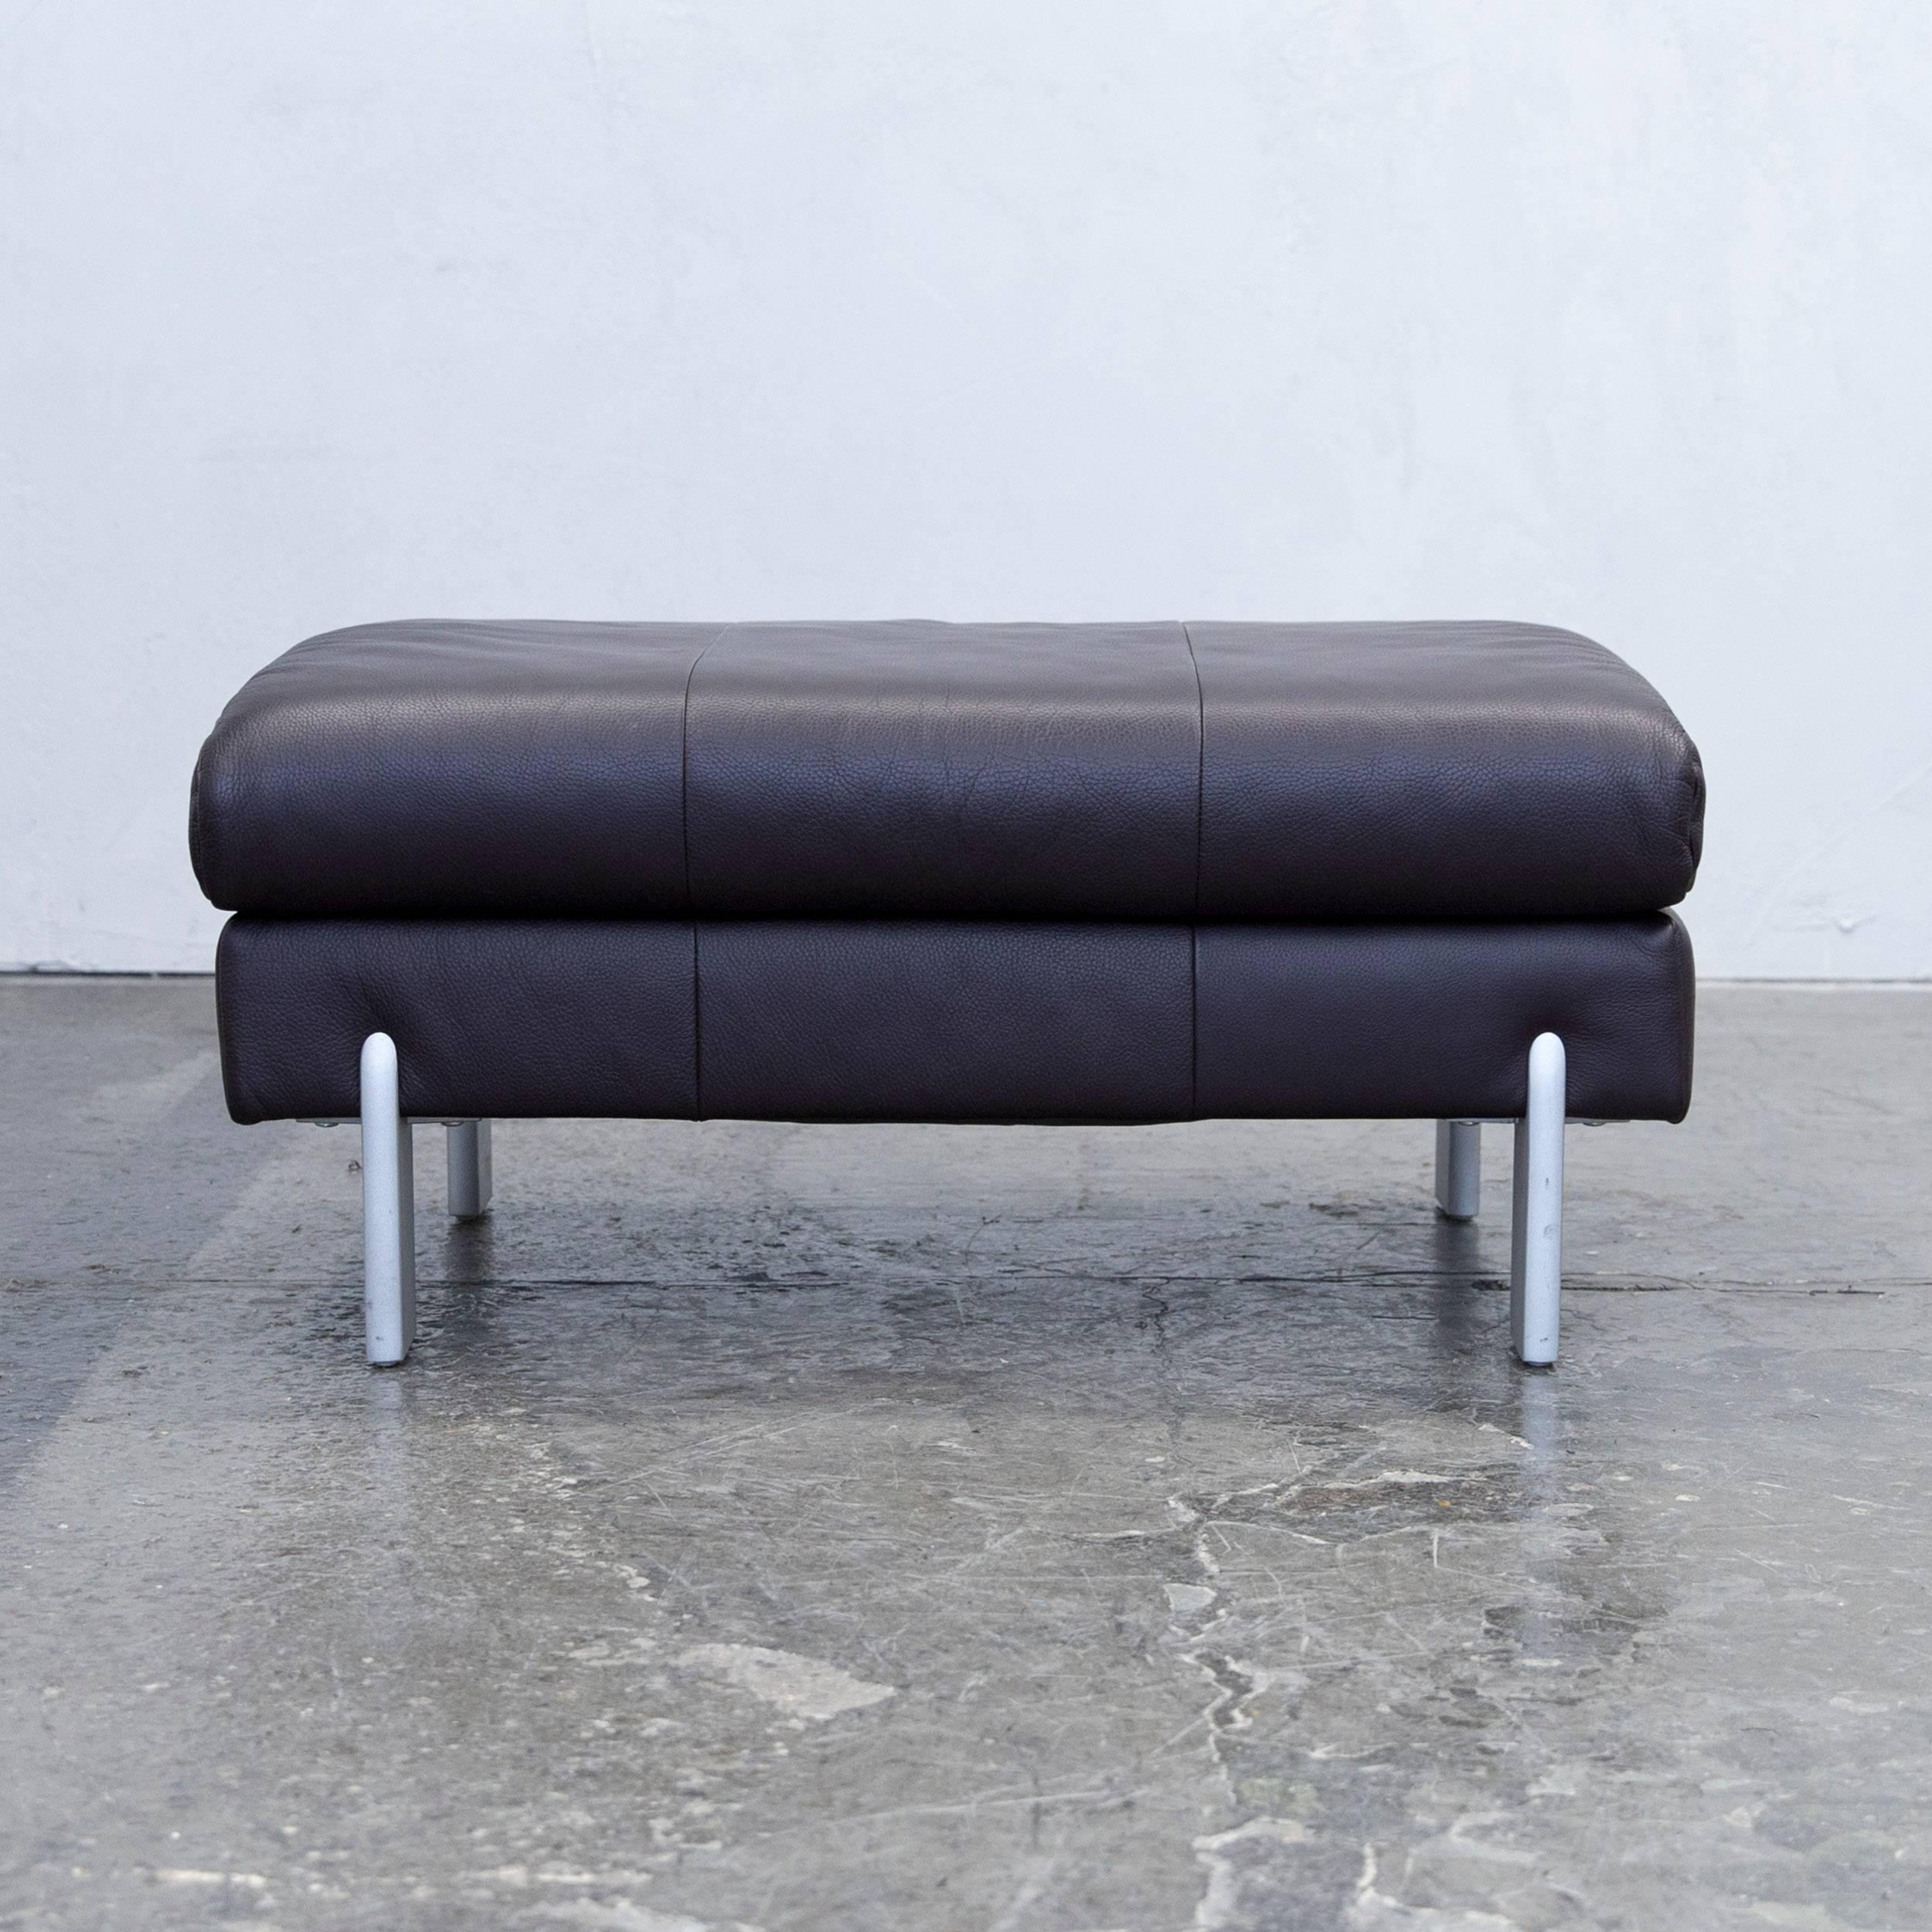 Aubergine colored original Rolf Benz designer leather footstool in a minimalistic and modern design, made for pure comfort and flexible placing.